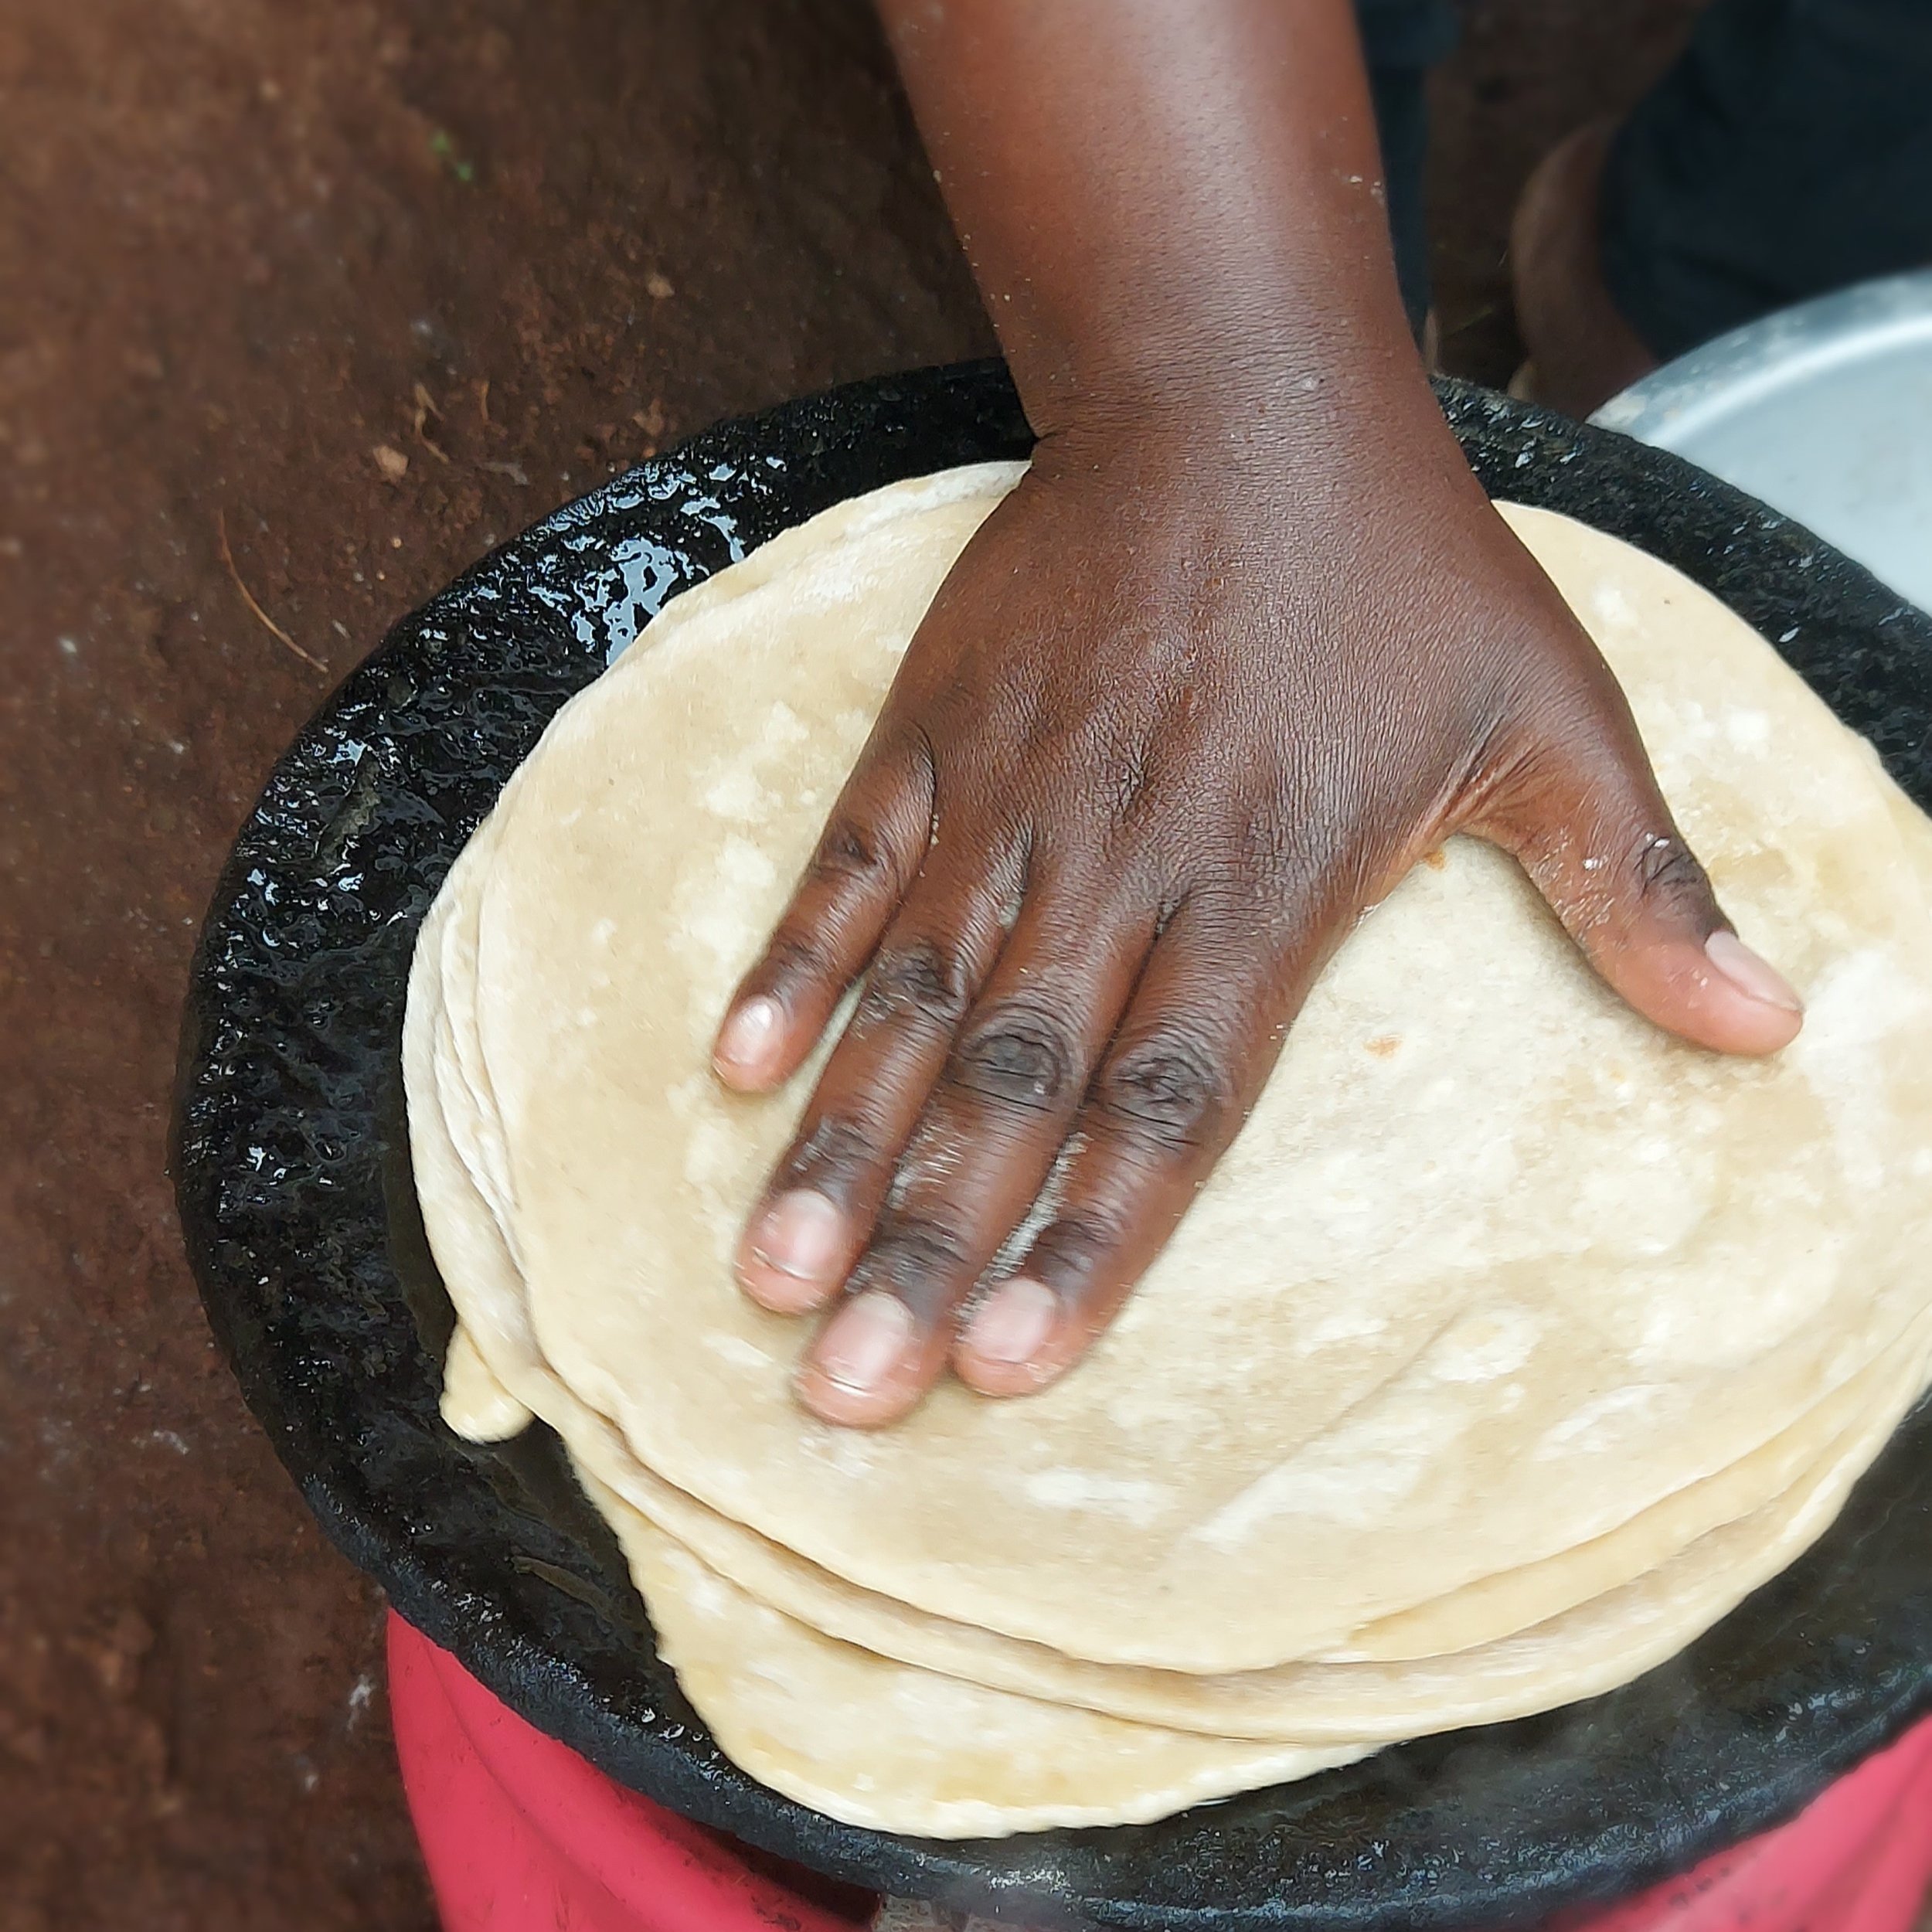 Cooking the chapati